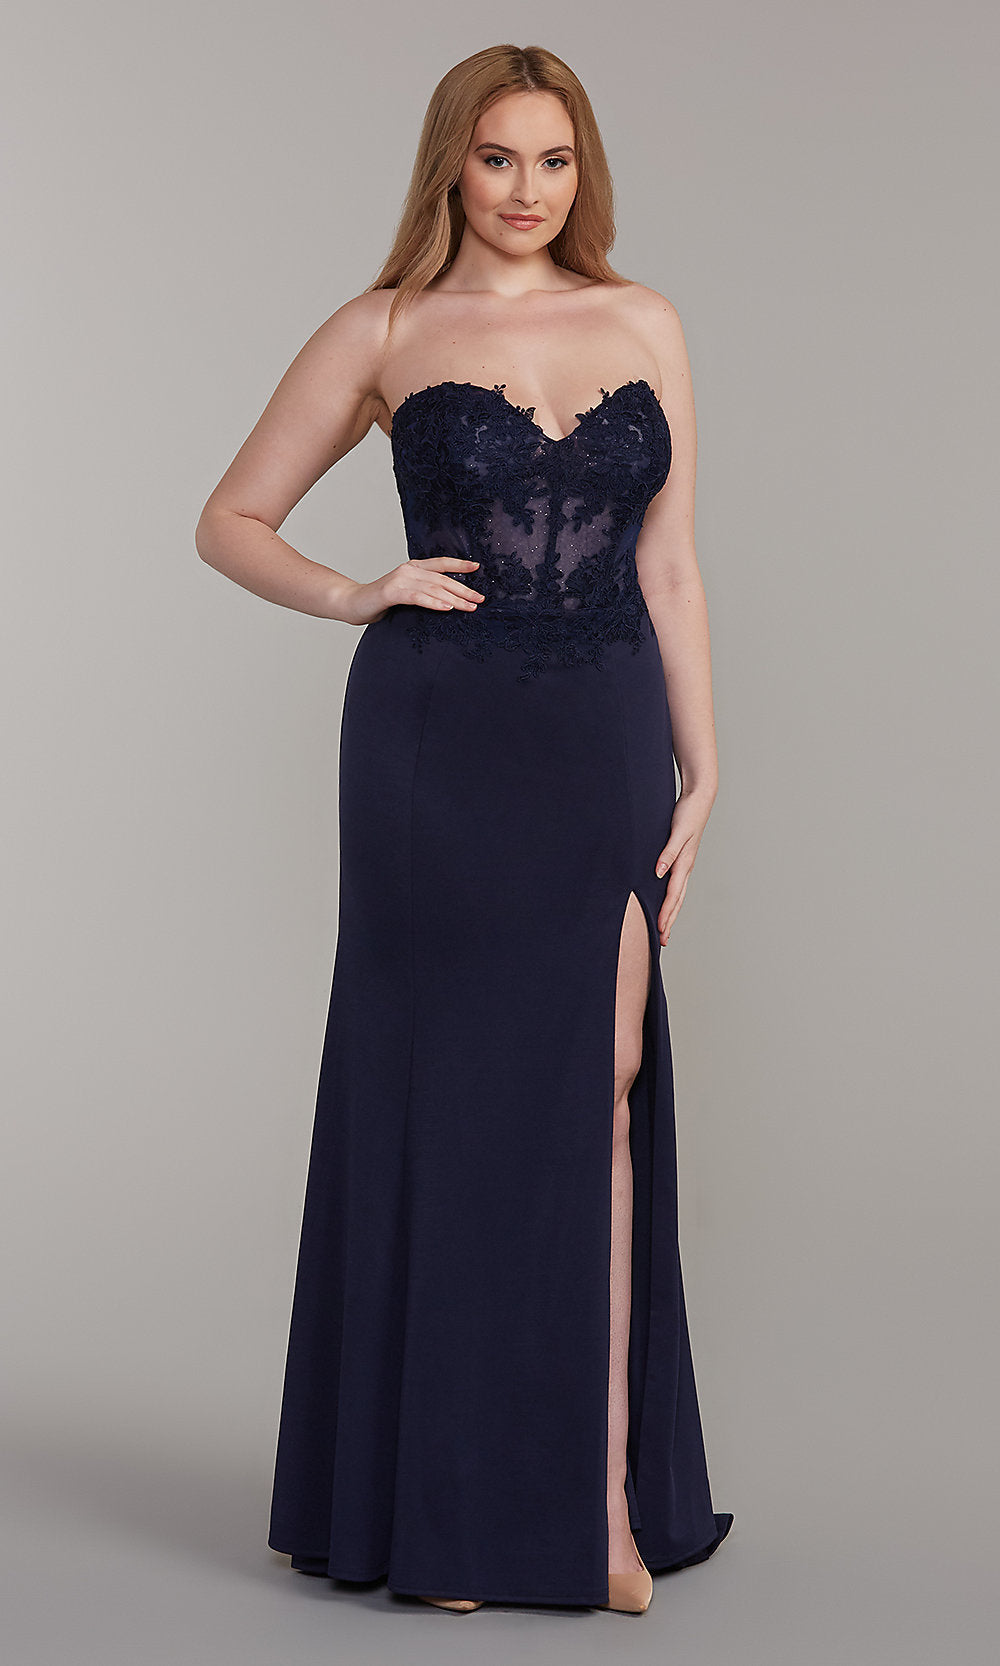  Embroidered-Bodice Strapless Long Formal Dress